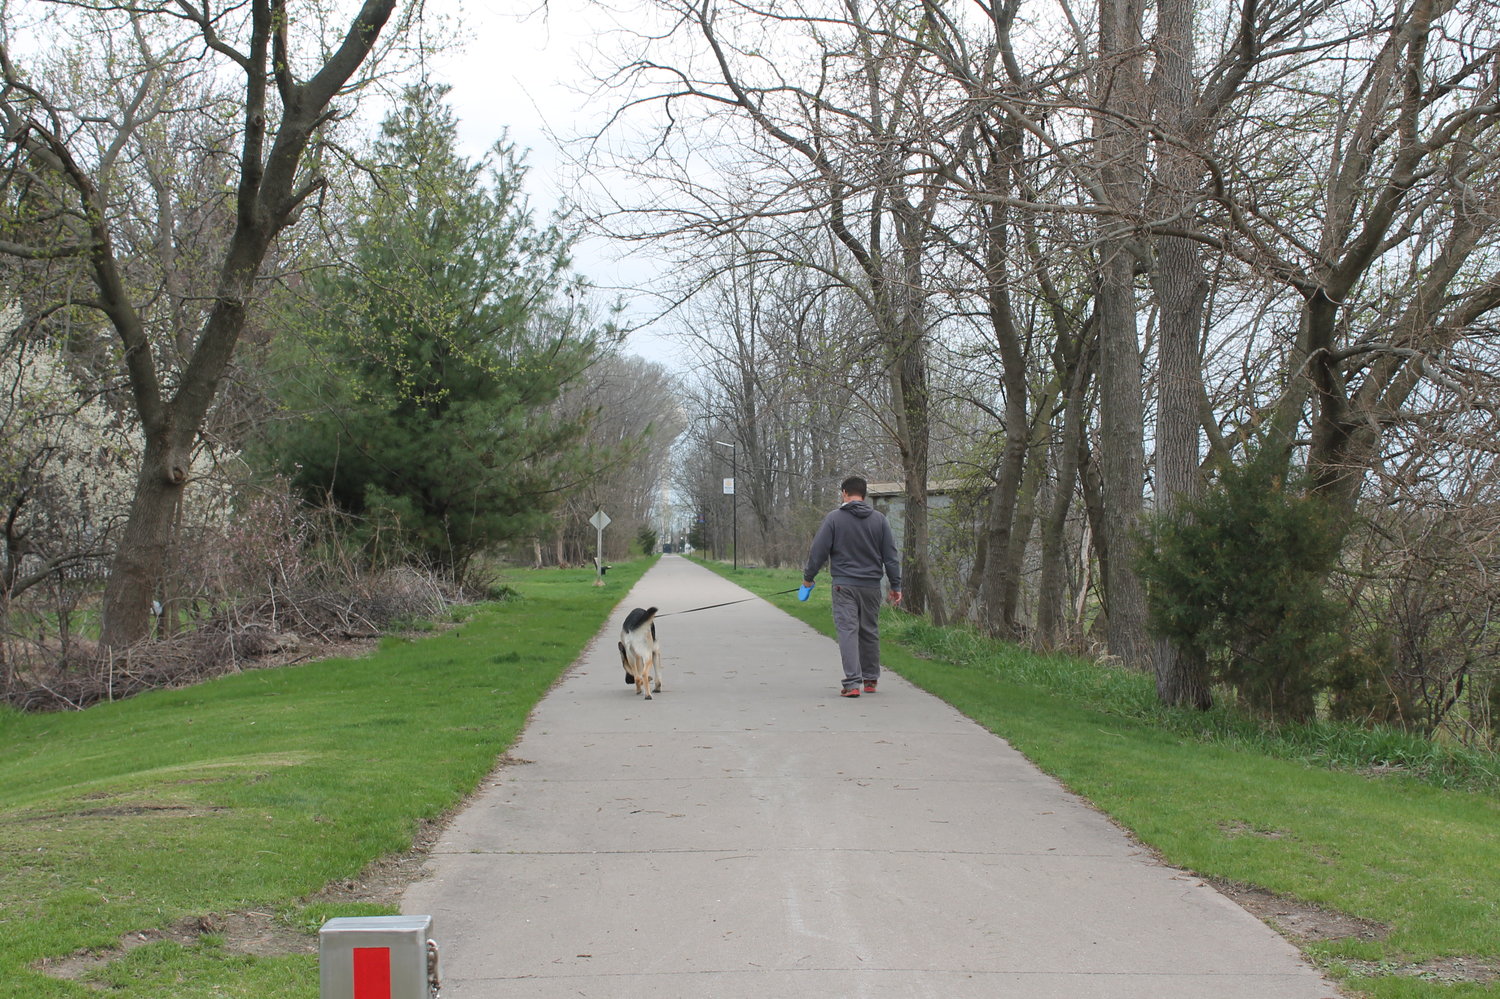 Dreams of more trails in West Liberty came up at the WeLead "Destination Iowa" grant proposal meeting, something Buddy and his owner, Dane Lovell, might find appealing, caught here taking a walk Monday evening on the Hoover walking/bike trail.